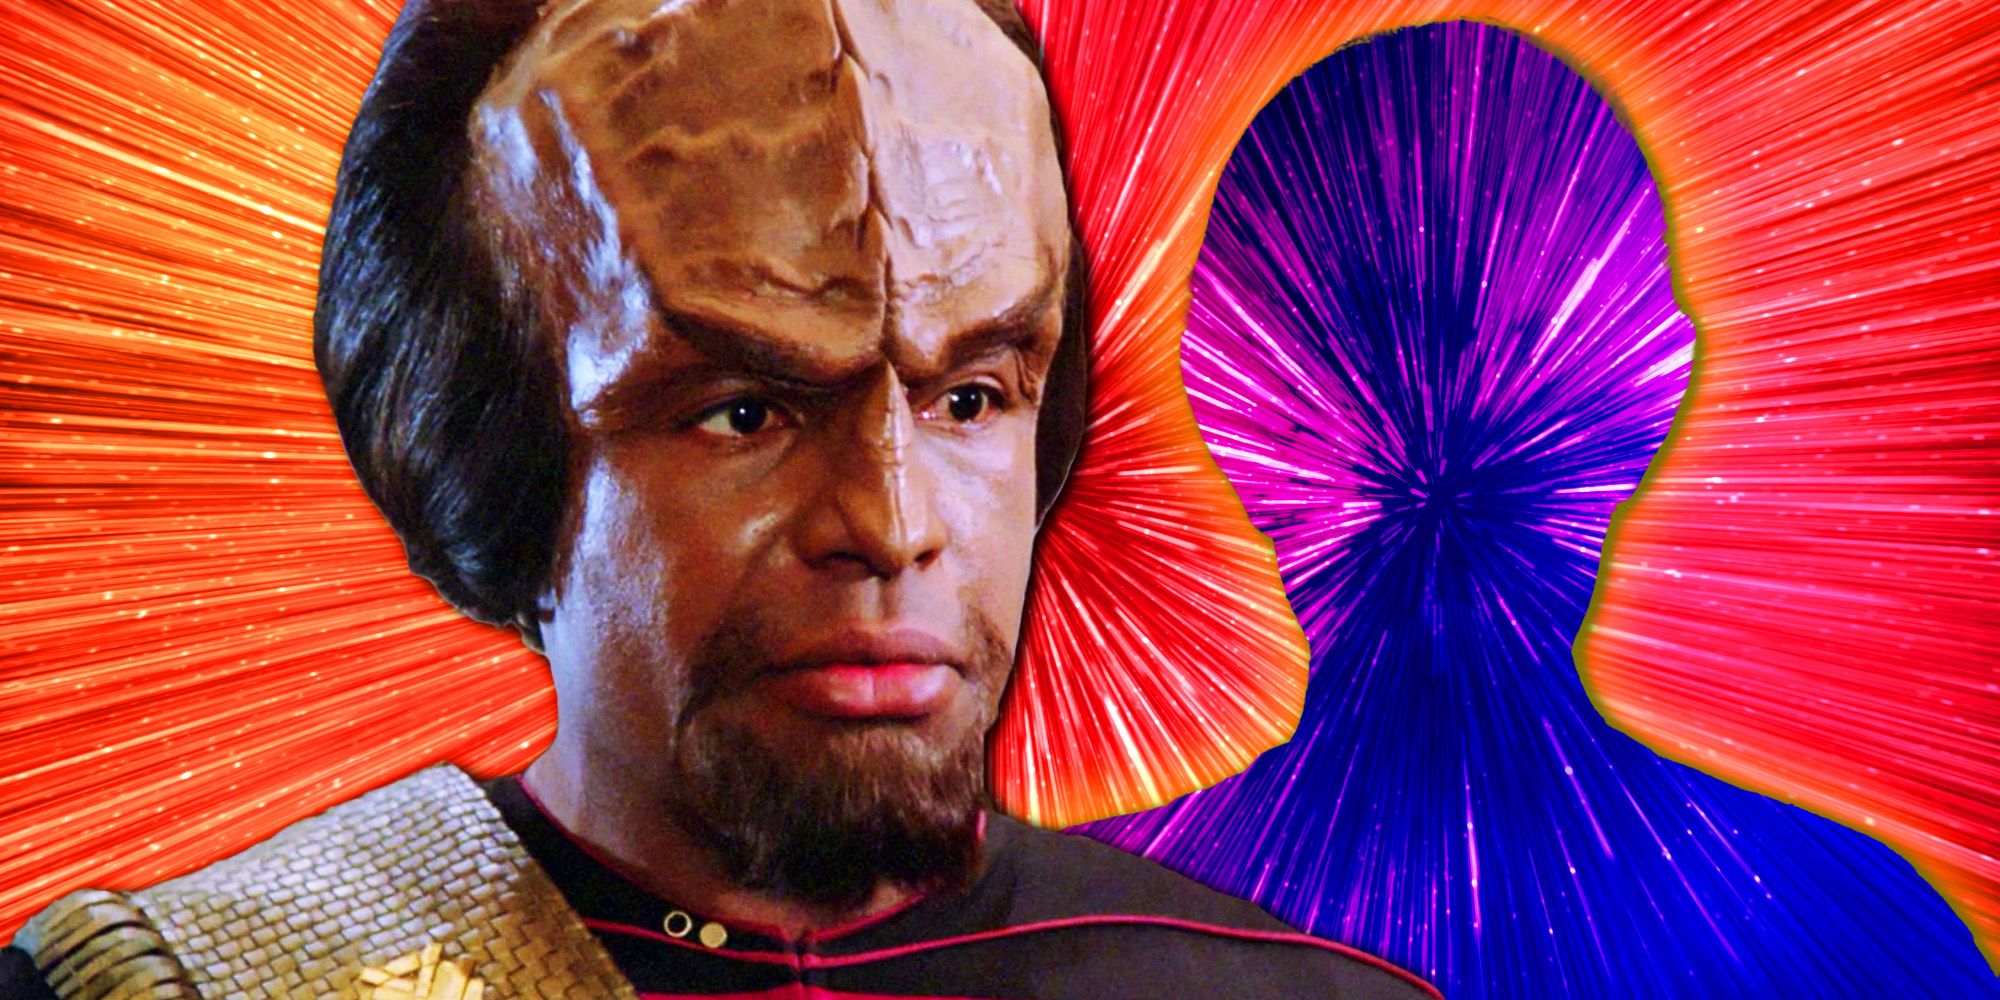 Worf from early TNG with a silhouette of Lt. Selar (Suzie Plakson) from _The Schizoid Man